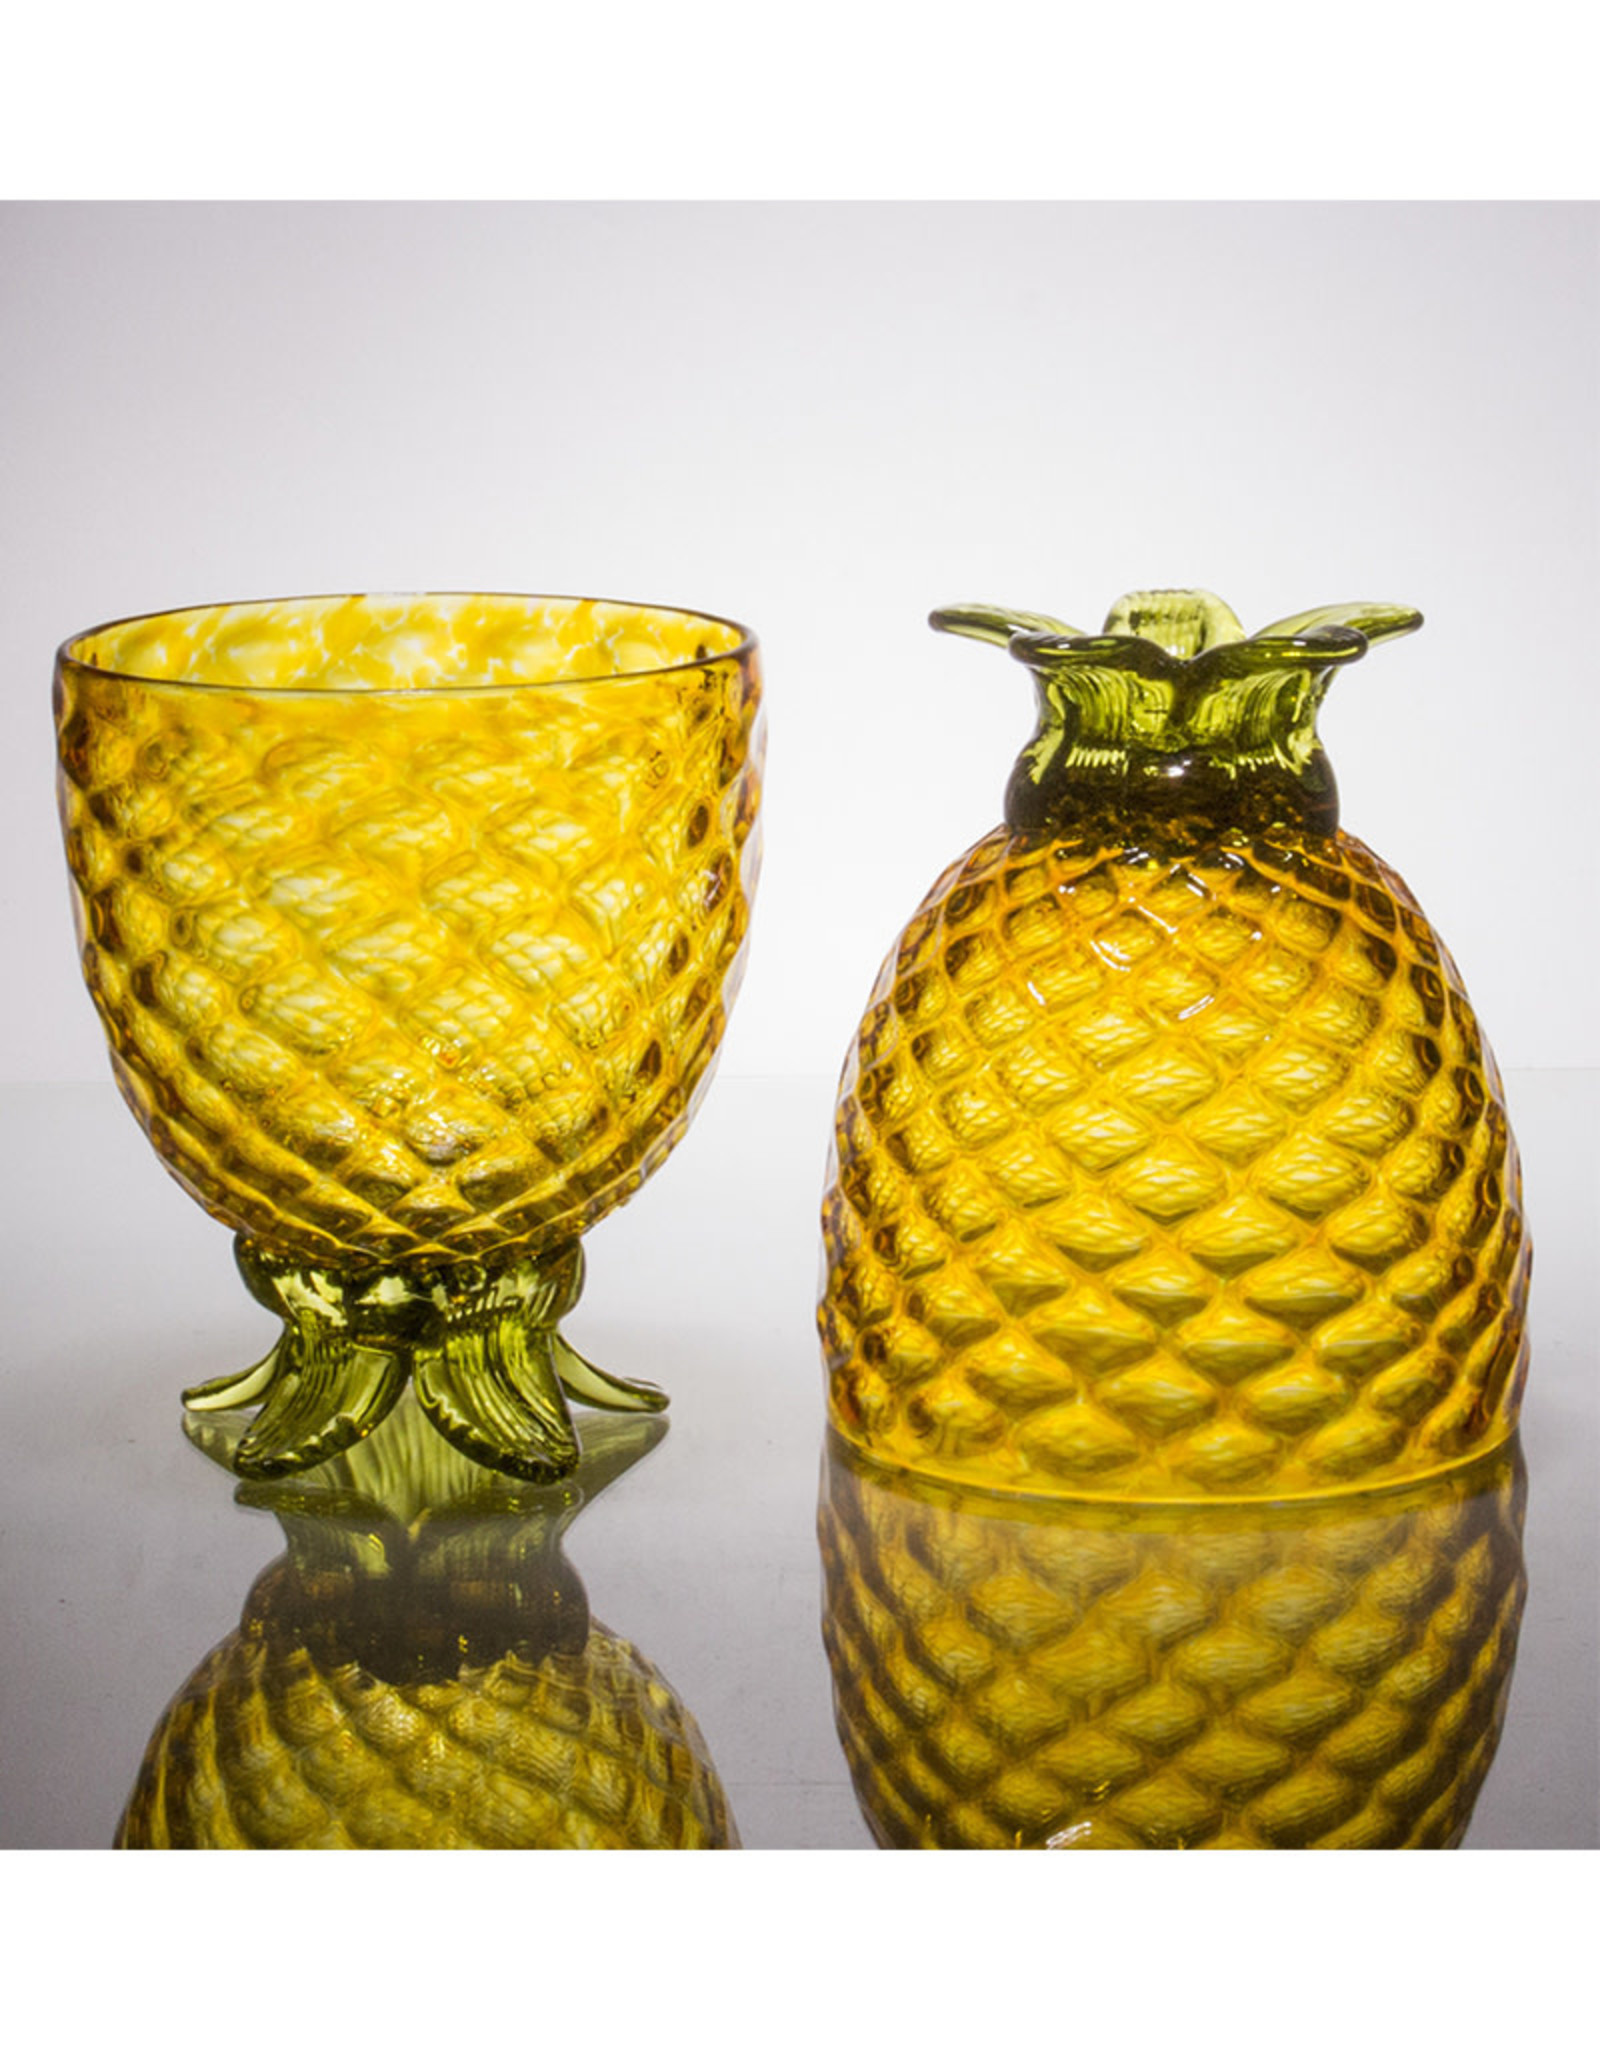 IANNAZZI GLASS DESIGN GOLD PINEAPPLE CUP